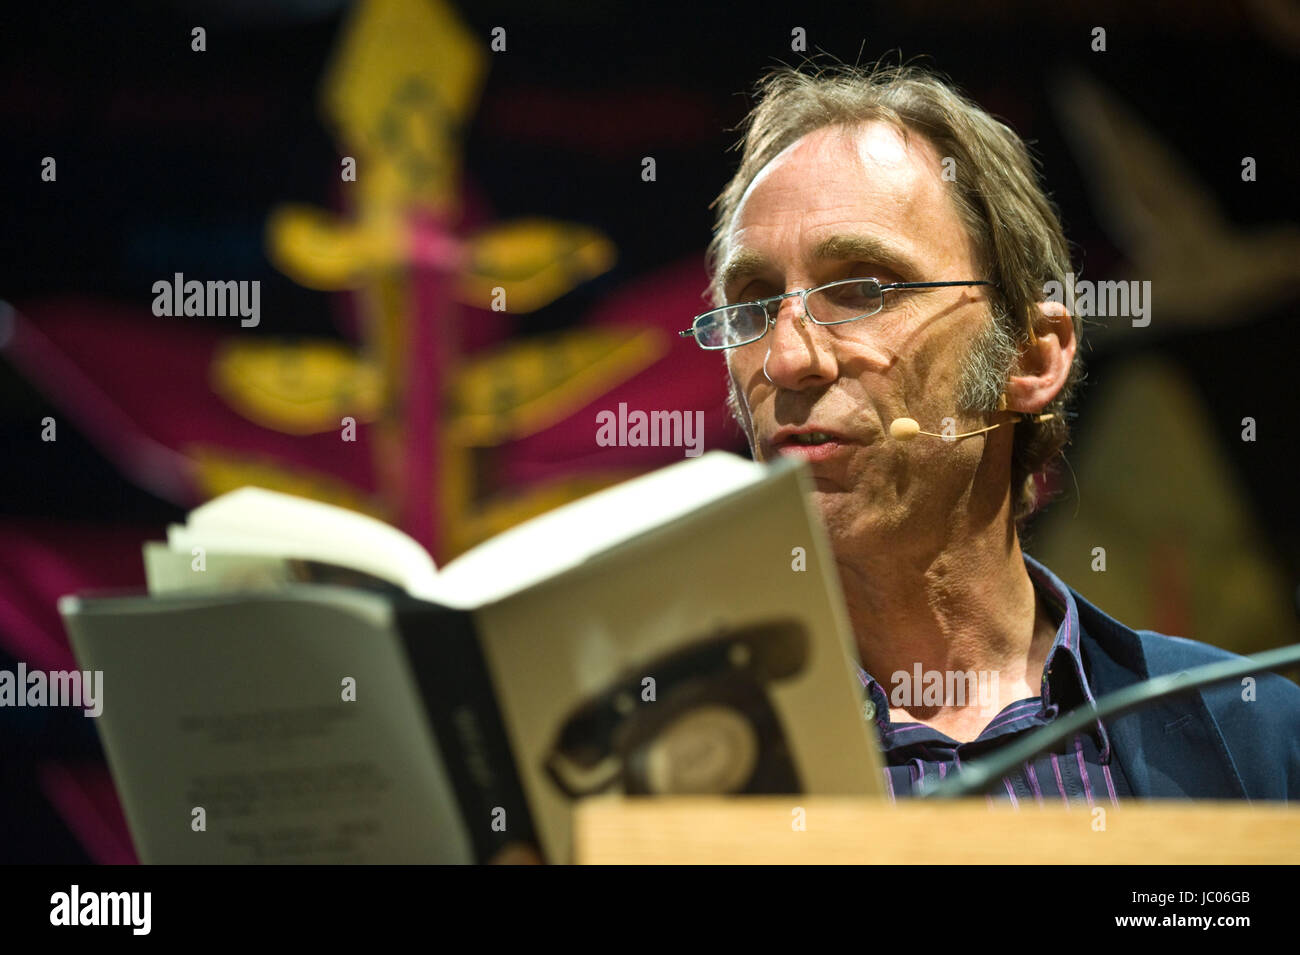 Will Self novelist reading from his novel Phone on stage at lectern during Hay Festival 2017 Hay-on-Wye Powys Wales UK Stock Photo